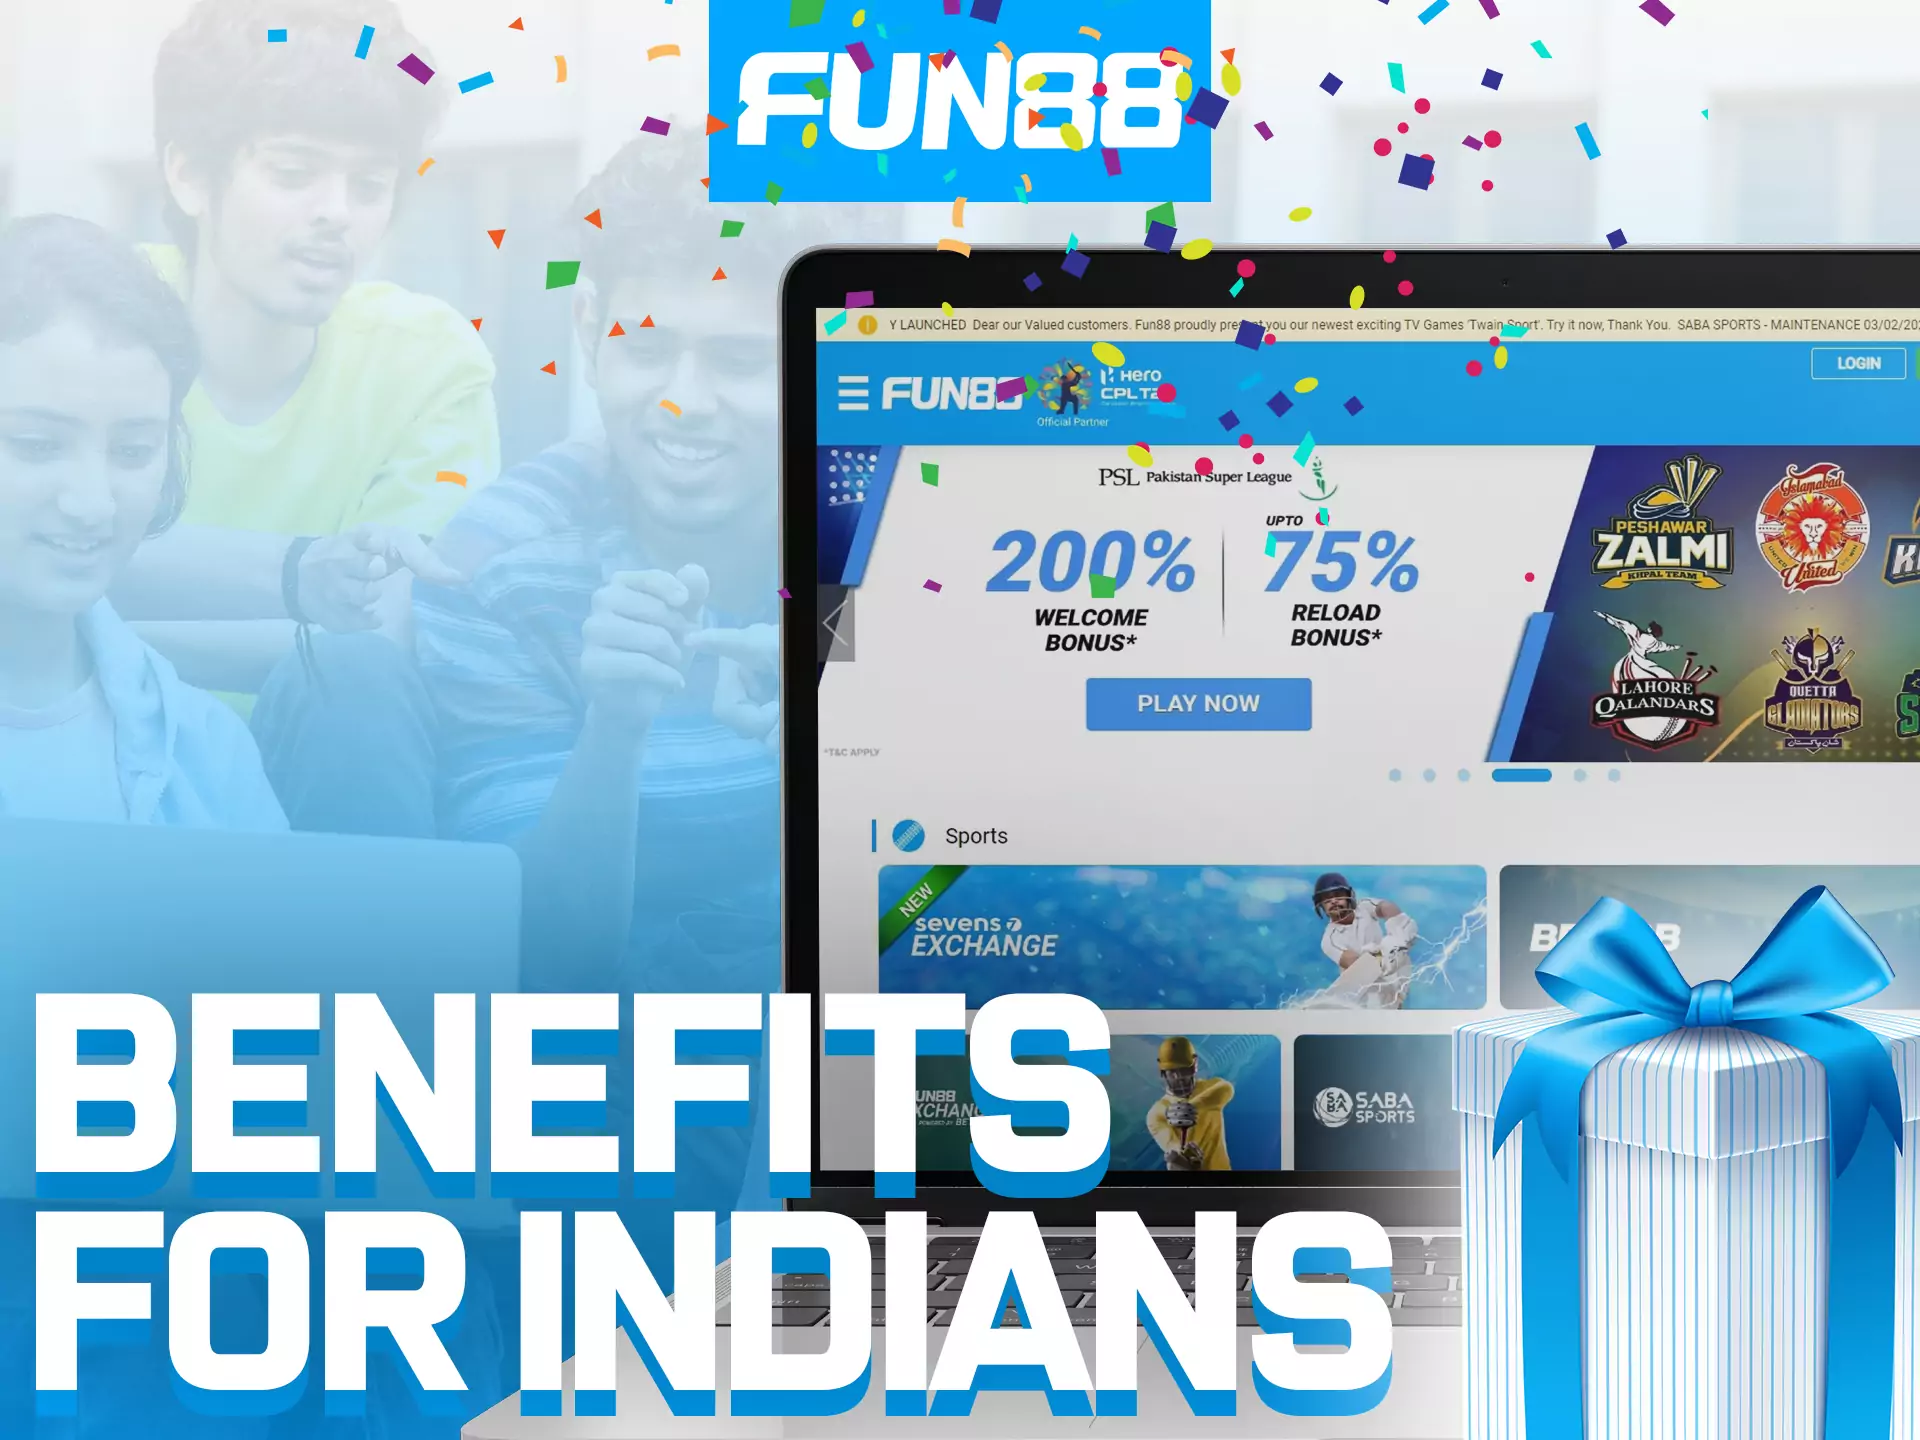 Fun88 offers its Indian users many perimunities and special bonuses.